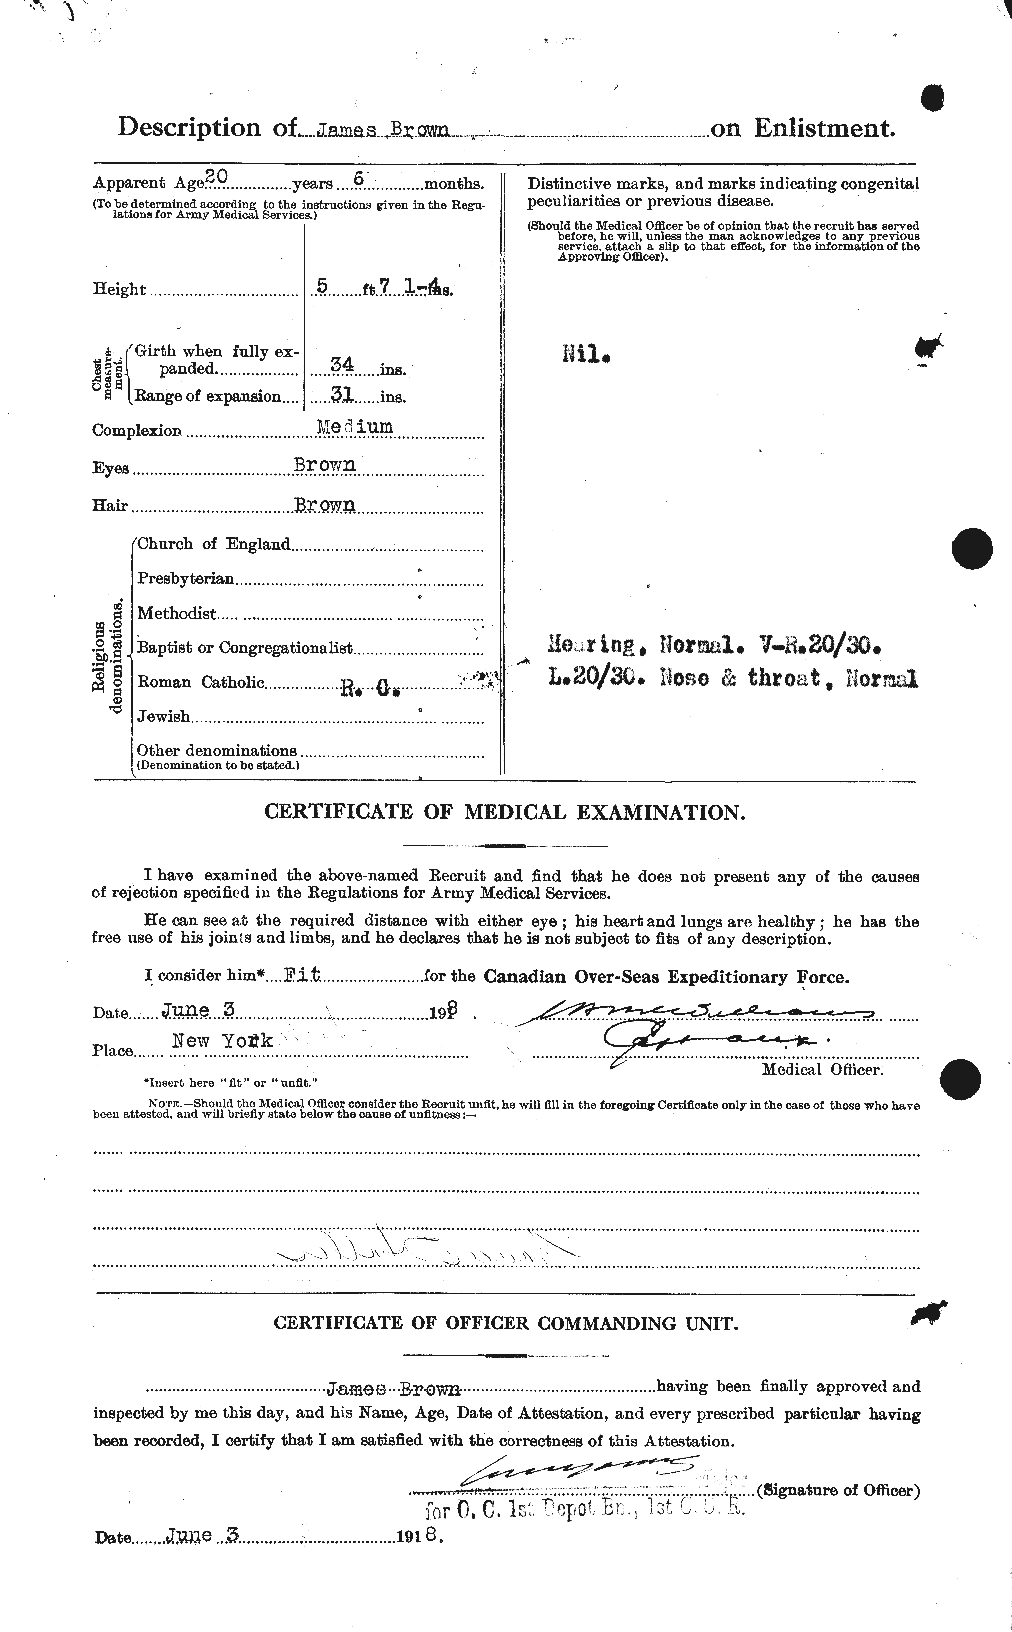 Personnel Records of the First World War - CEF 265772b